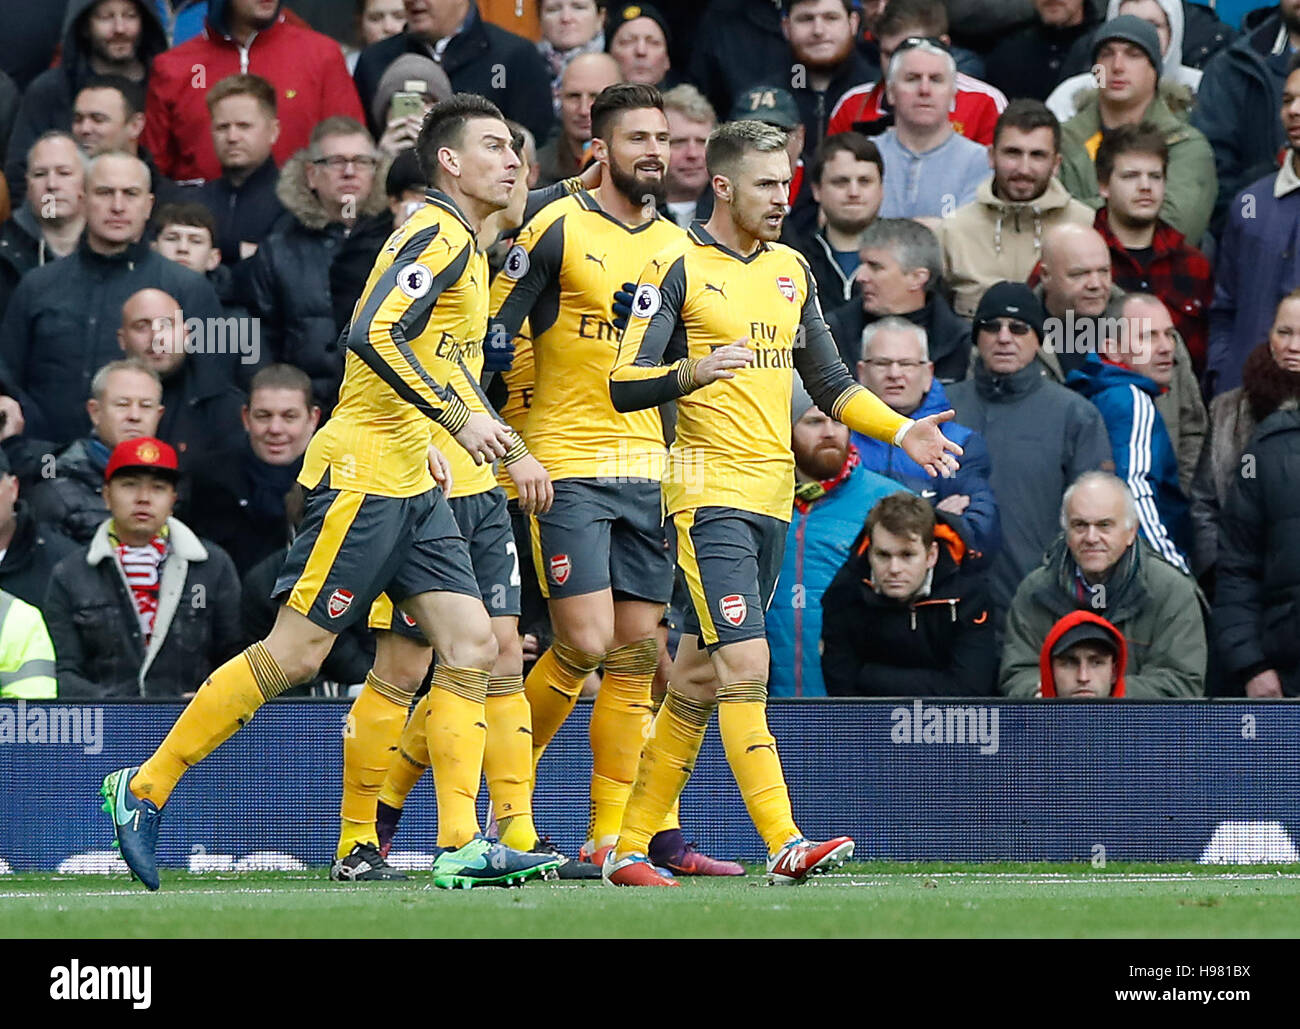 Arsenals Olivier Giroud Centre Celebrates Scoring His Sides First